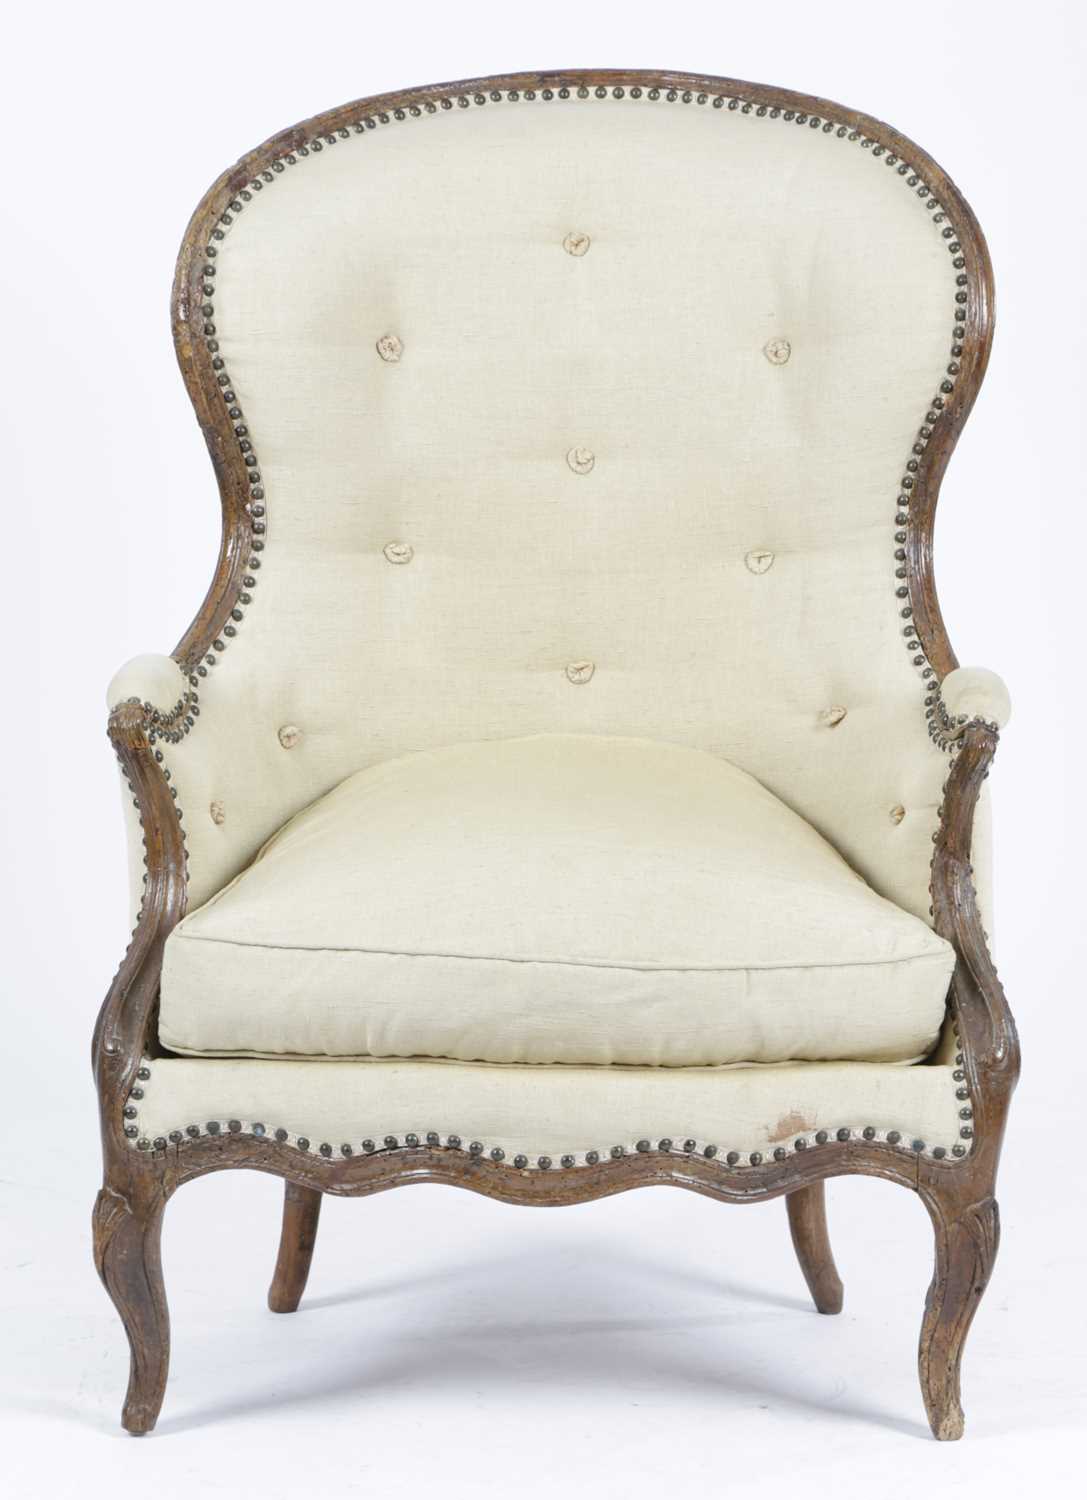 AN ITALIAN WALNUT BERGÈRE 18TH CENTURY with later brass studded upholstery, the moulded frame on - Image 2 of 2